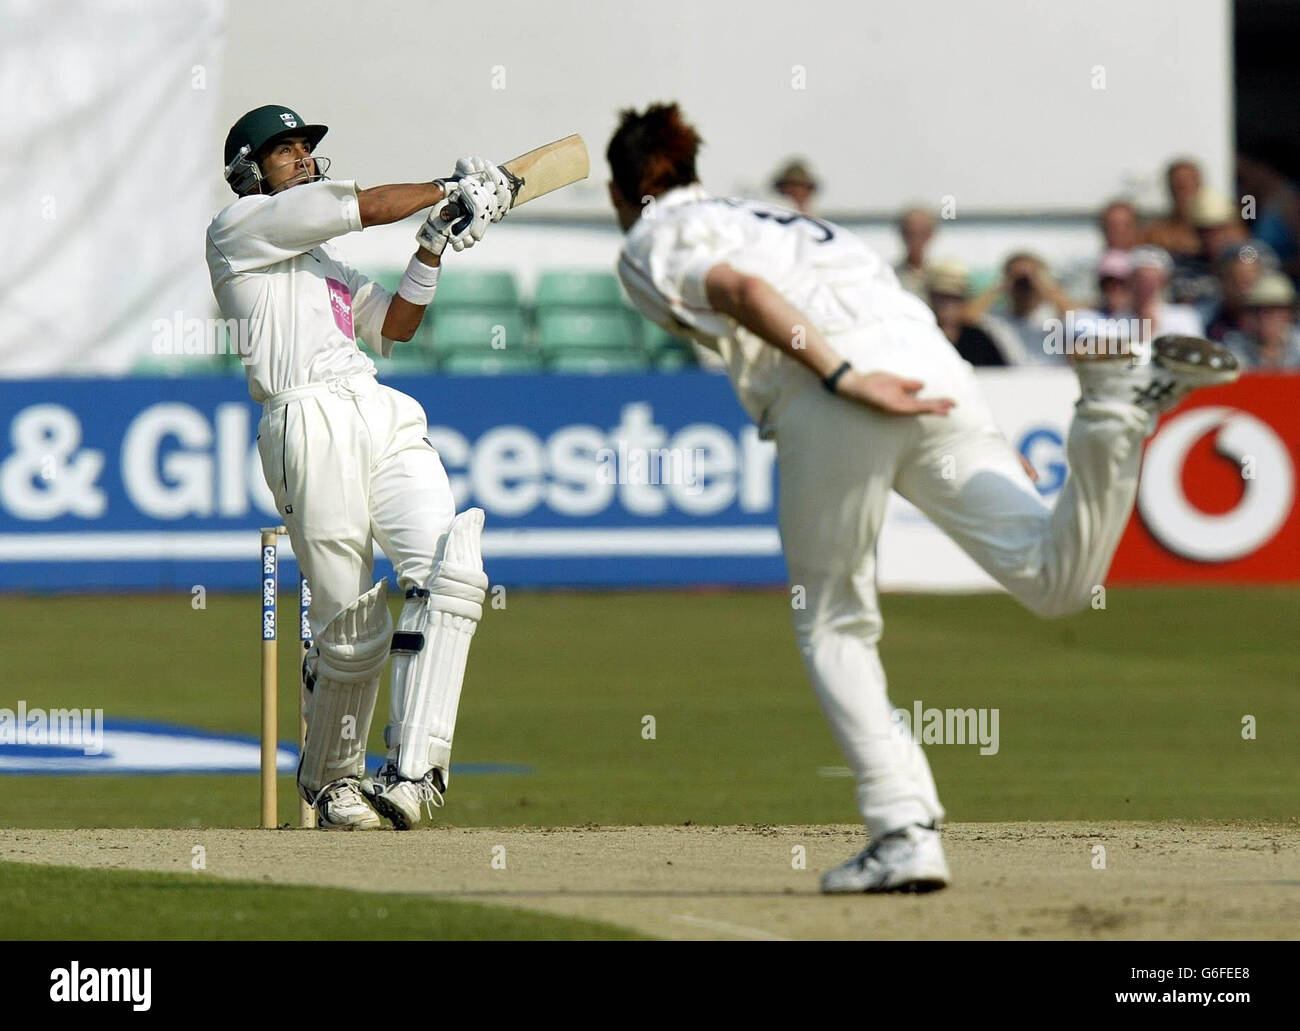 Worcestershire's Vikram Solanki mishooks a delivery from Lancashire's Jimmy Anderson and is caught by Warren Hegg for 2 during the C&G Trophy Semi Final at New Road, Worcester. Stock Photo